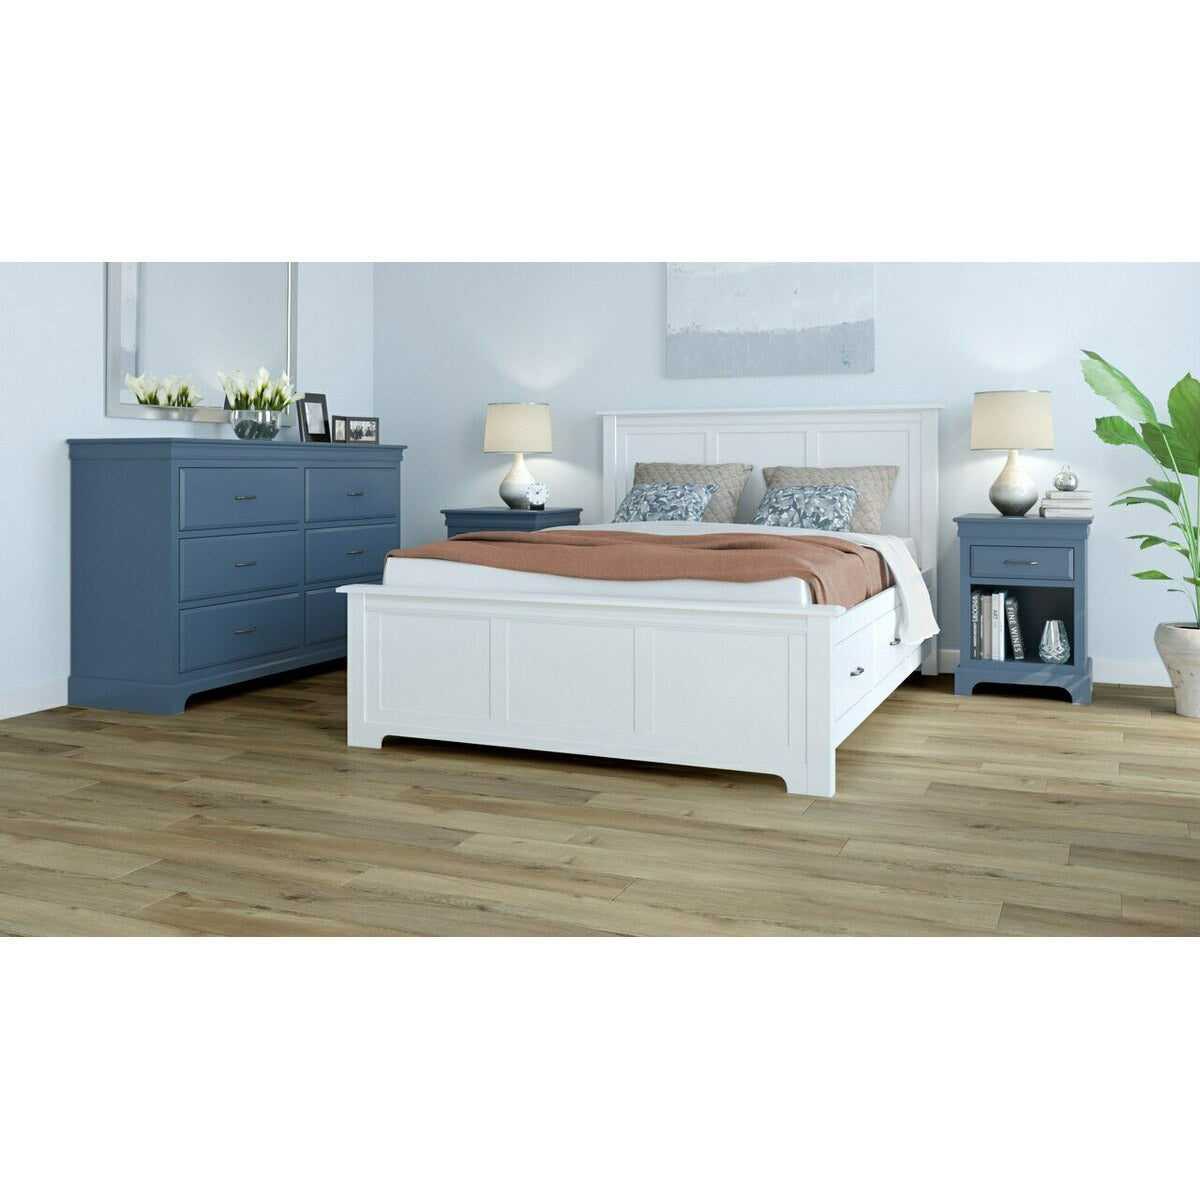 Engineered Floors - Cascade Collection - 7 in. x 48 in. - Key Largo